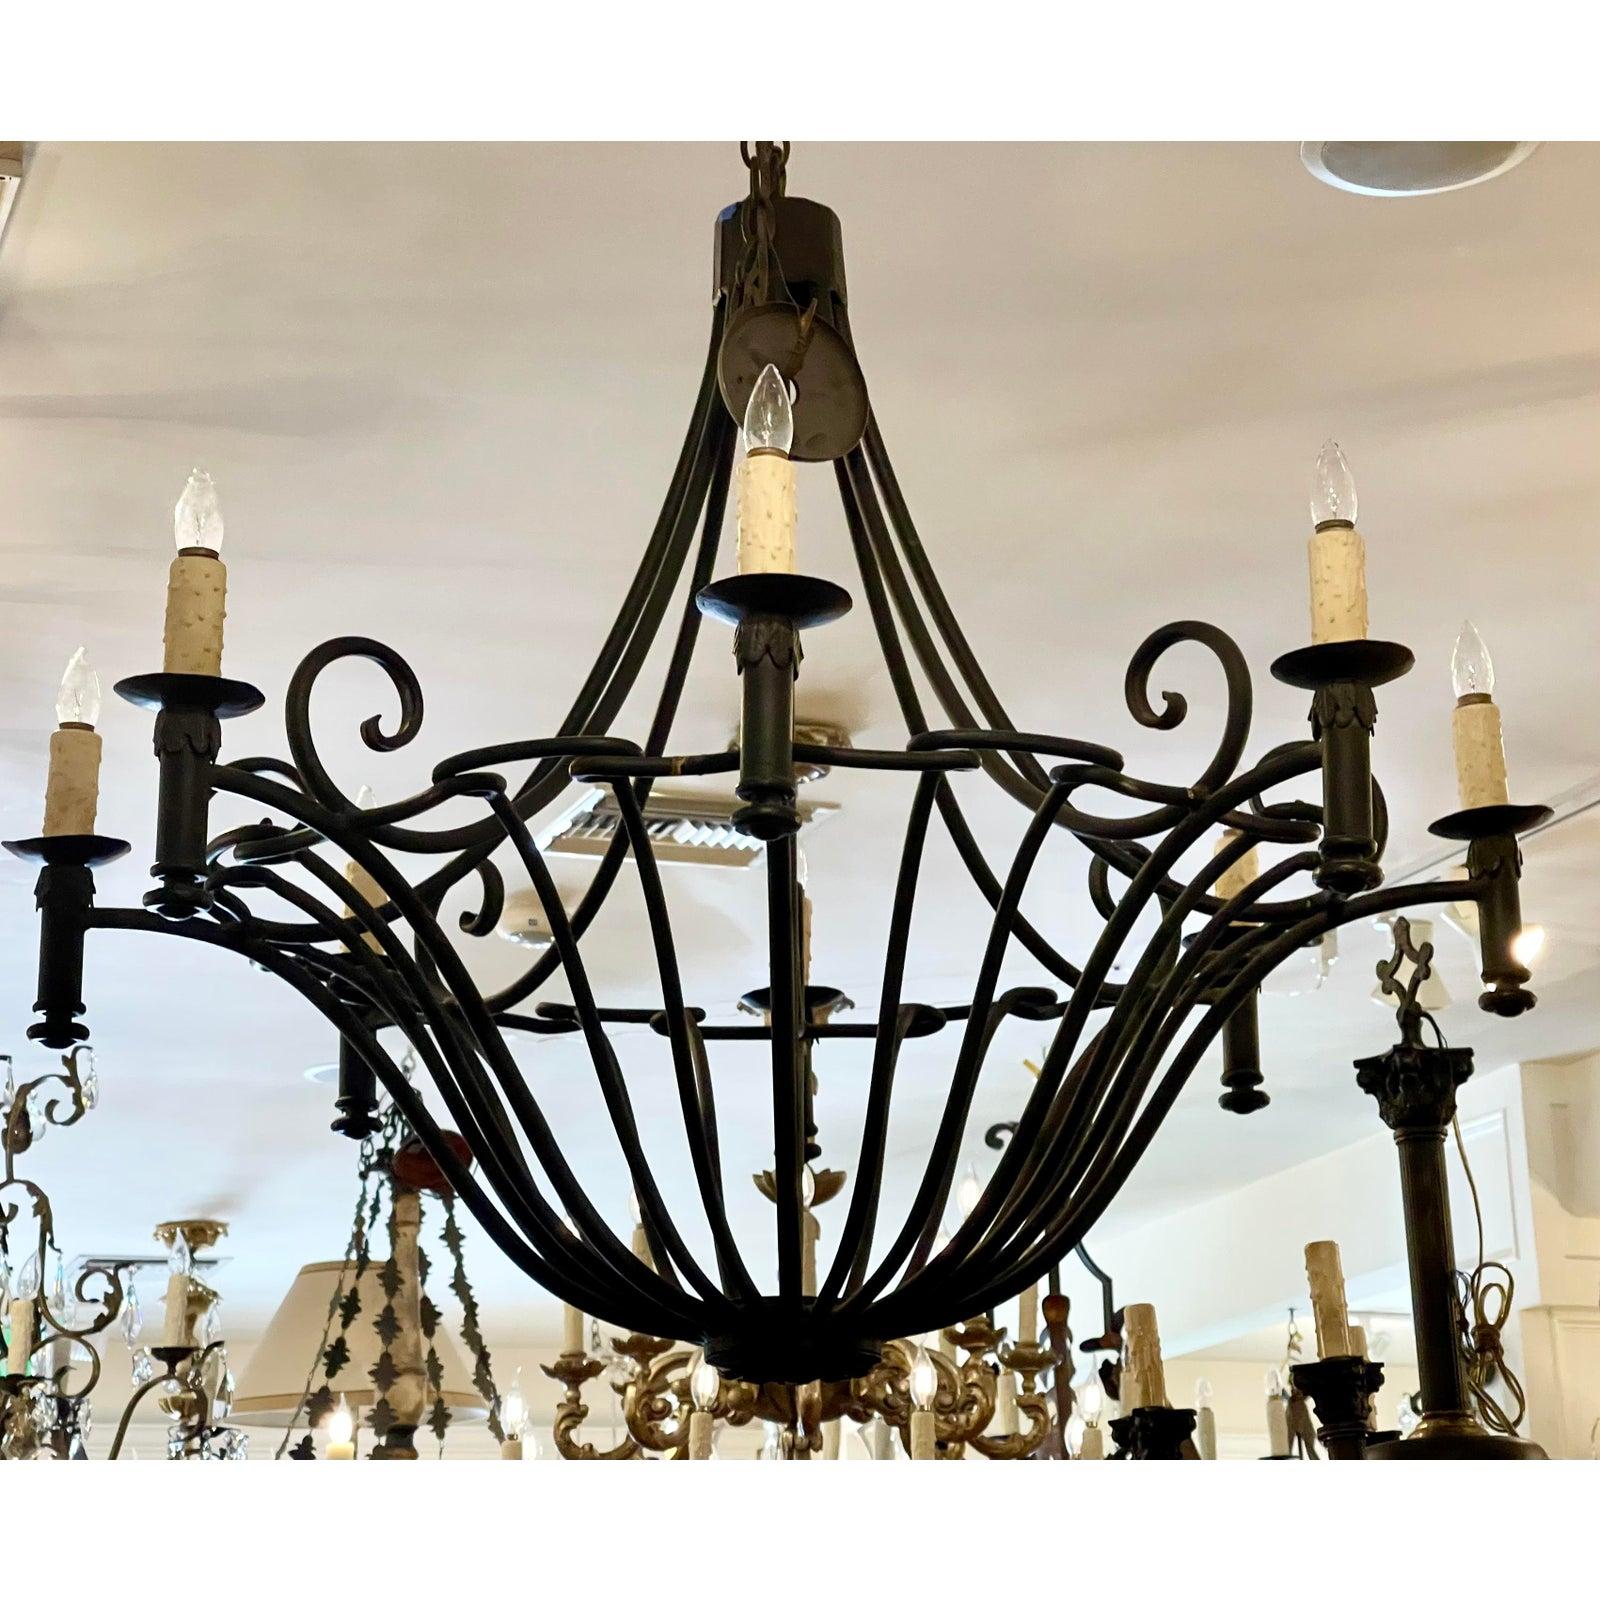 Ebanista Spanish Colonial wrought iron chandelier. Beautifully hand wrought iron and 8 lights. Includes original chain and canopy.

Provenance: From The $58M Beverly Hills Estate of Sylvester Stallone which was purchased by Adele.

Additional